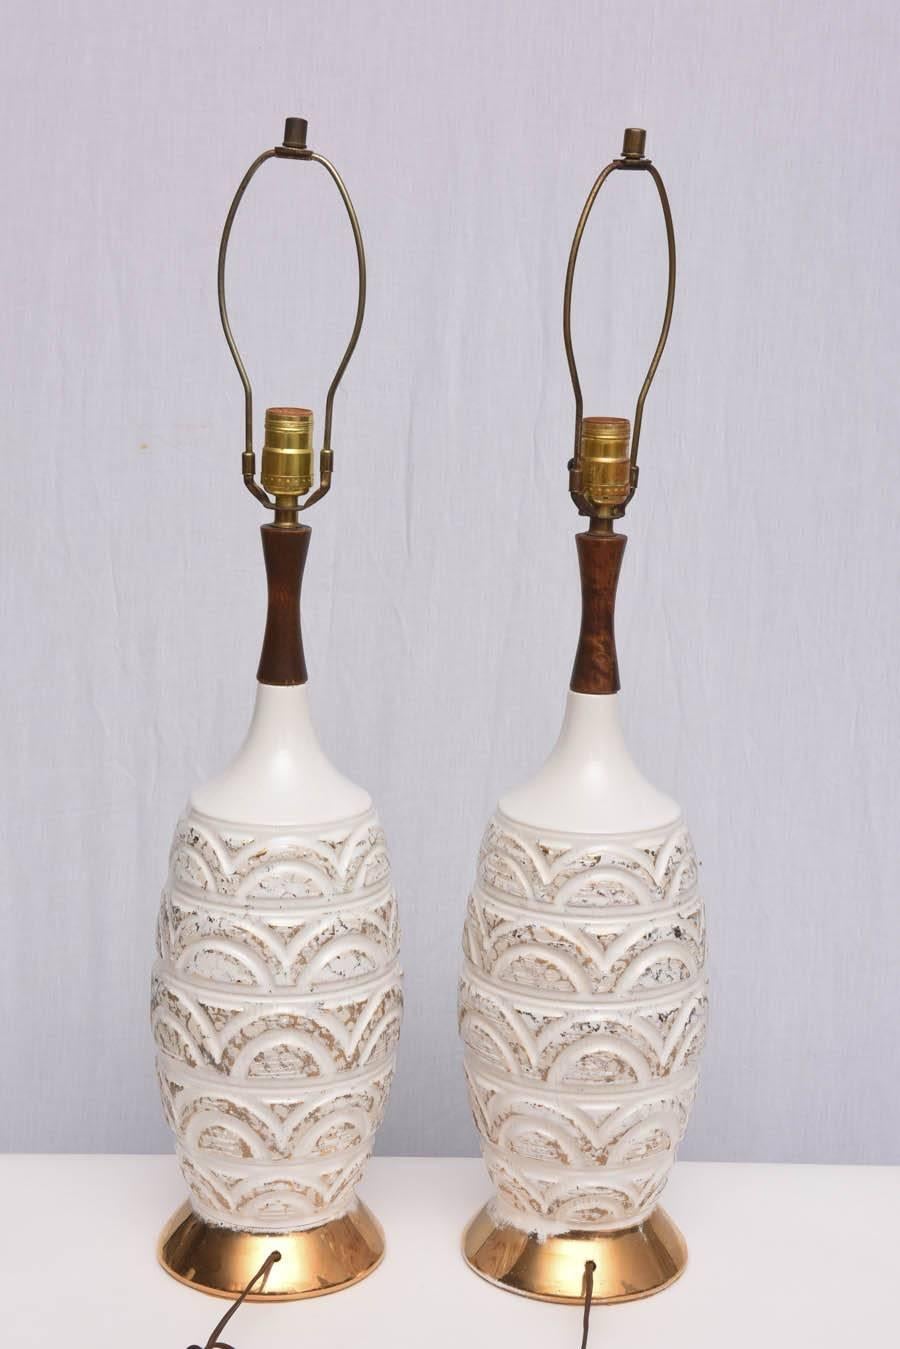 Ceramic Incised Lamps with Gold Bases, USA, 1960s For Sale 1